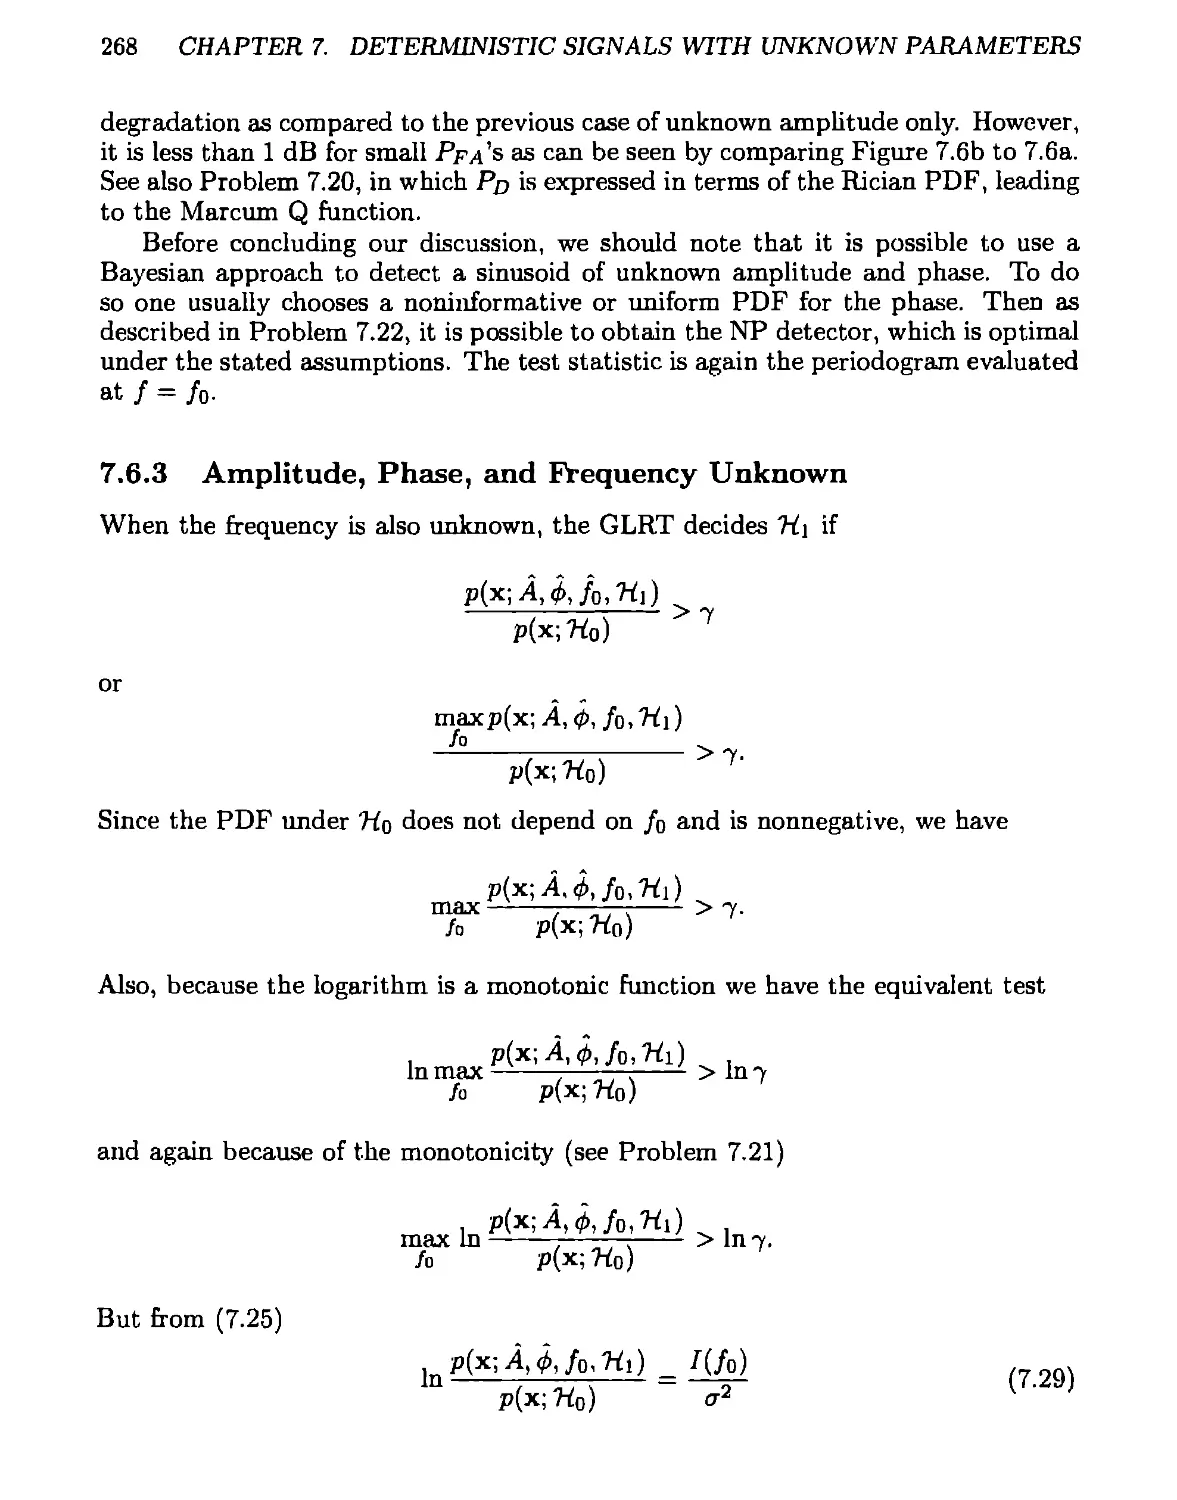 7.6.3 Amplitude, Phase, and Frequency Unknown